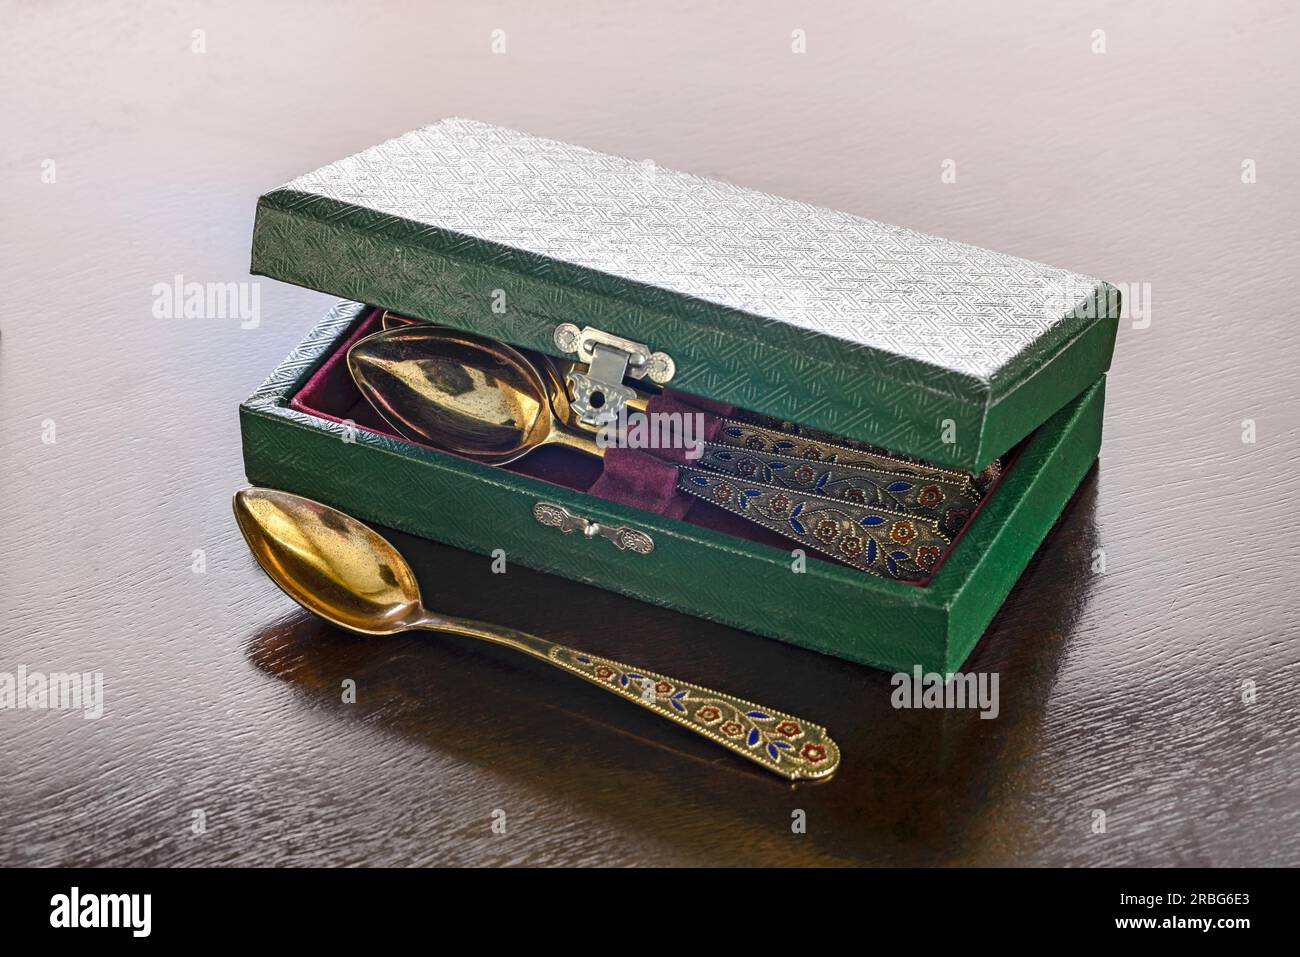 An antique golden spoons case on a wooden table Stock Photo